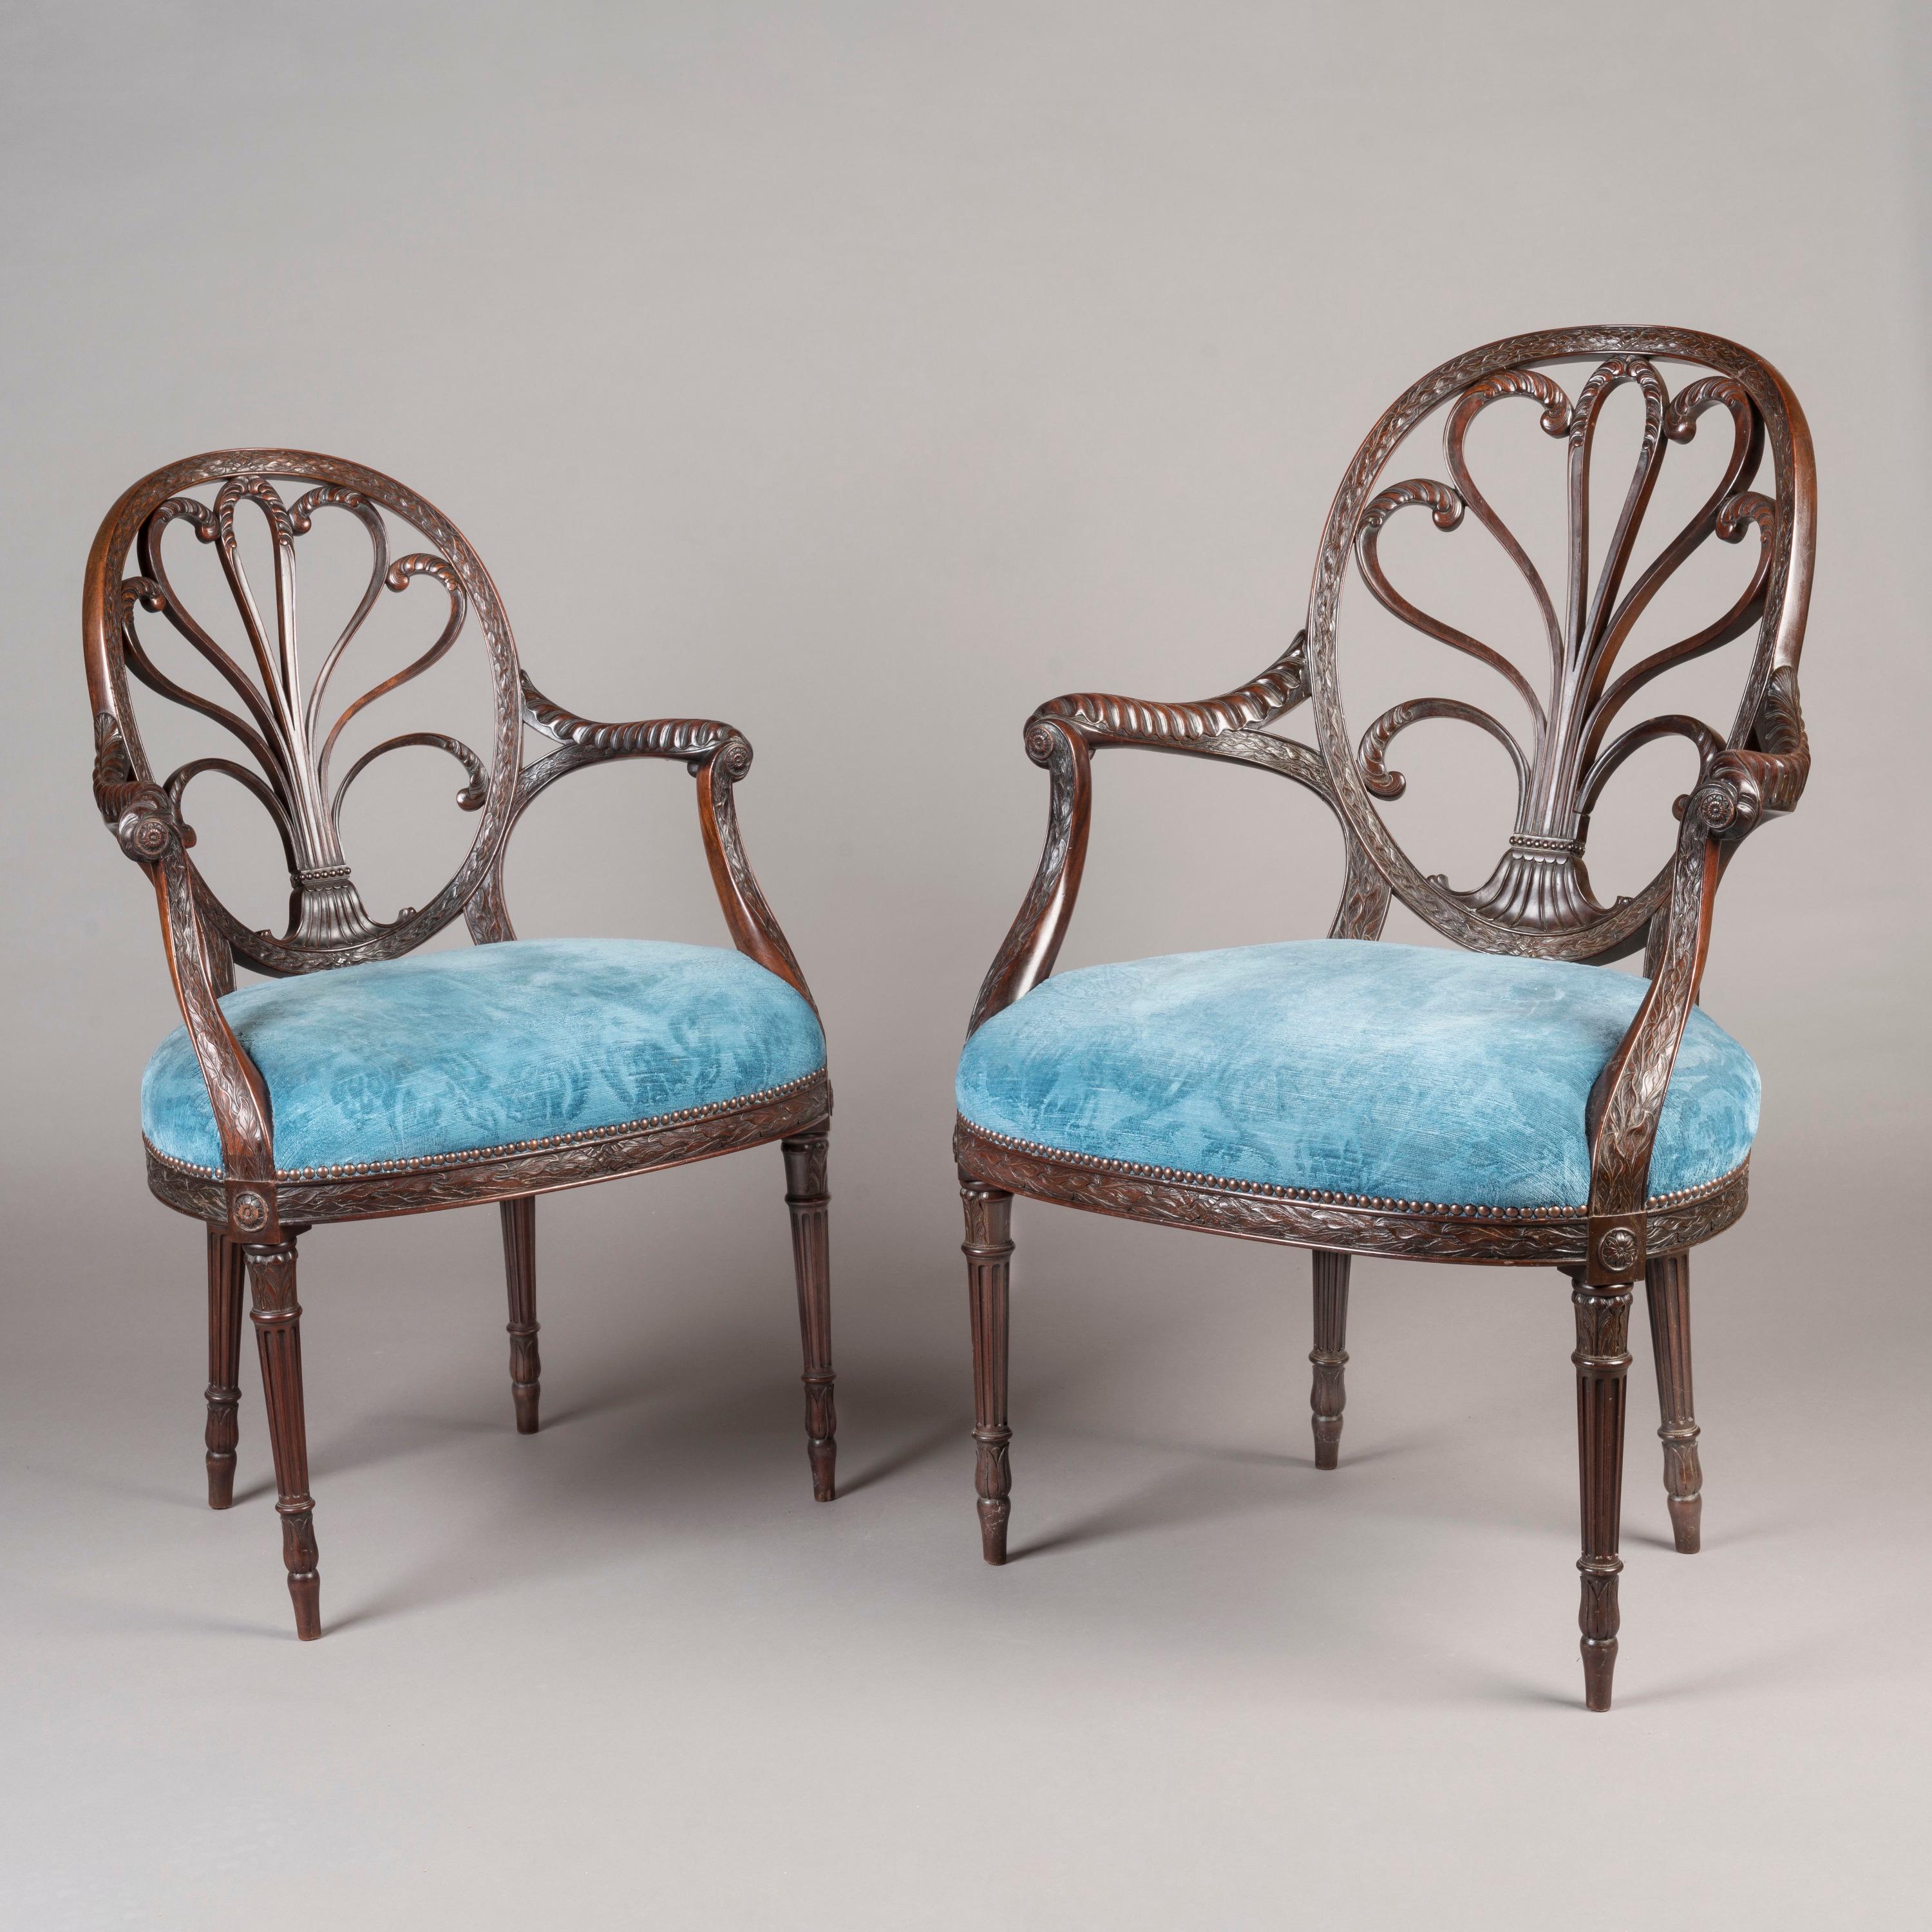 Neoclassical Revival Set of Twelve 19th Century English Neo-Classical Mahogany Dining Chairs For Sale